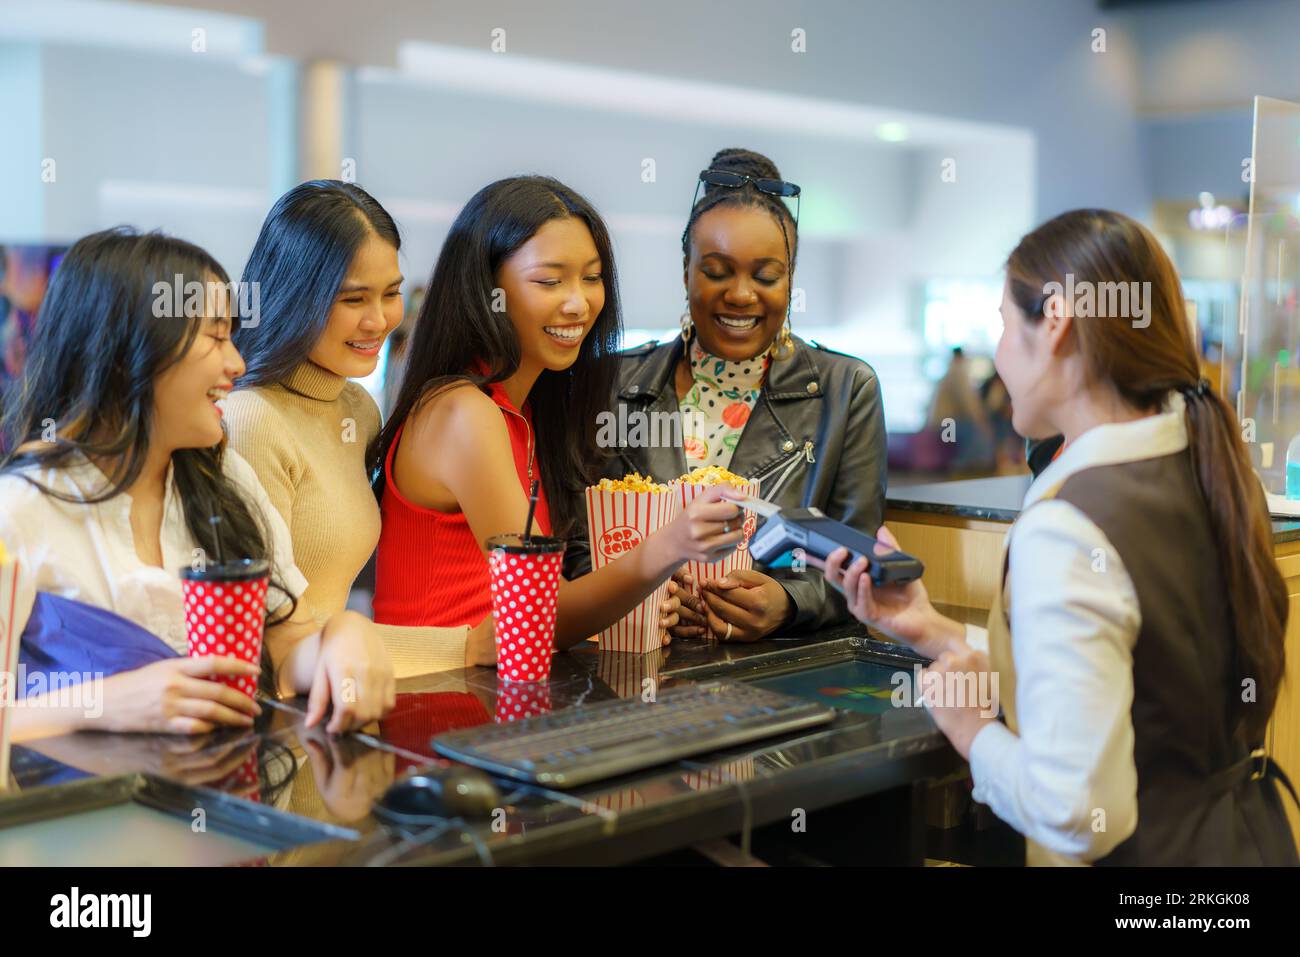 Effortlessly, interracial female friends pay for movie tickets using a credit card at the counter, embracing contactless convenience for a seamless ci Stock Photo